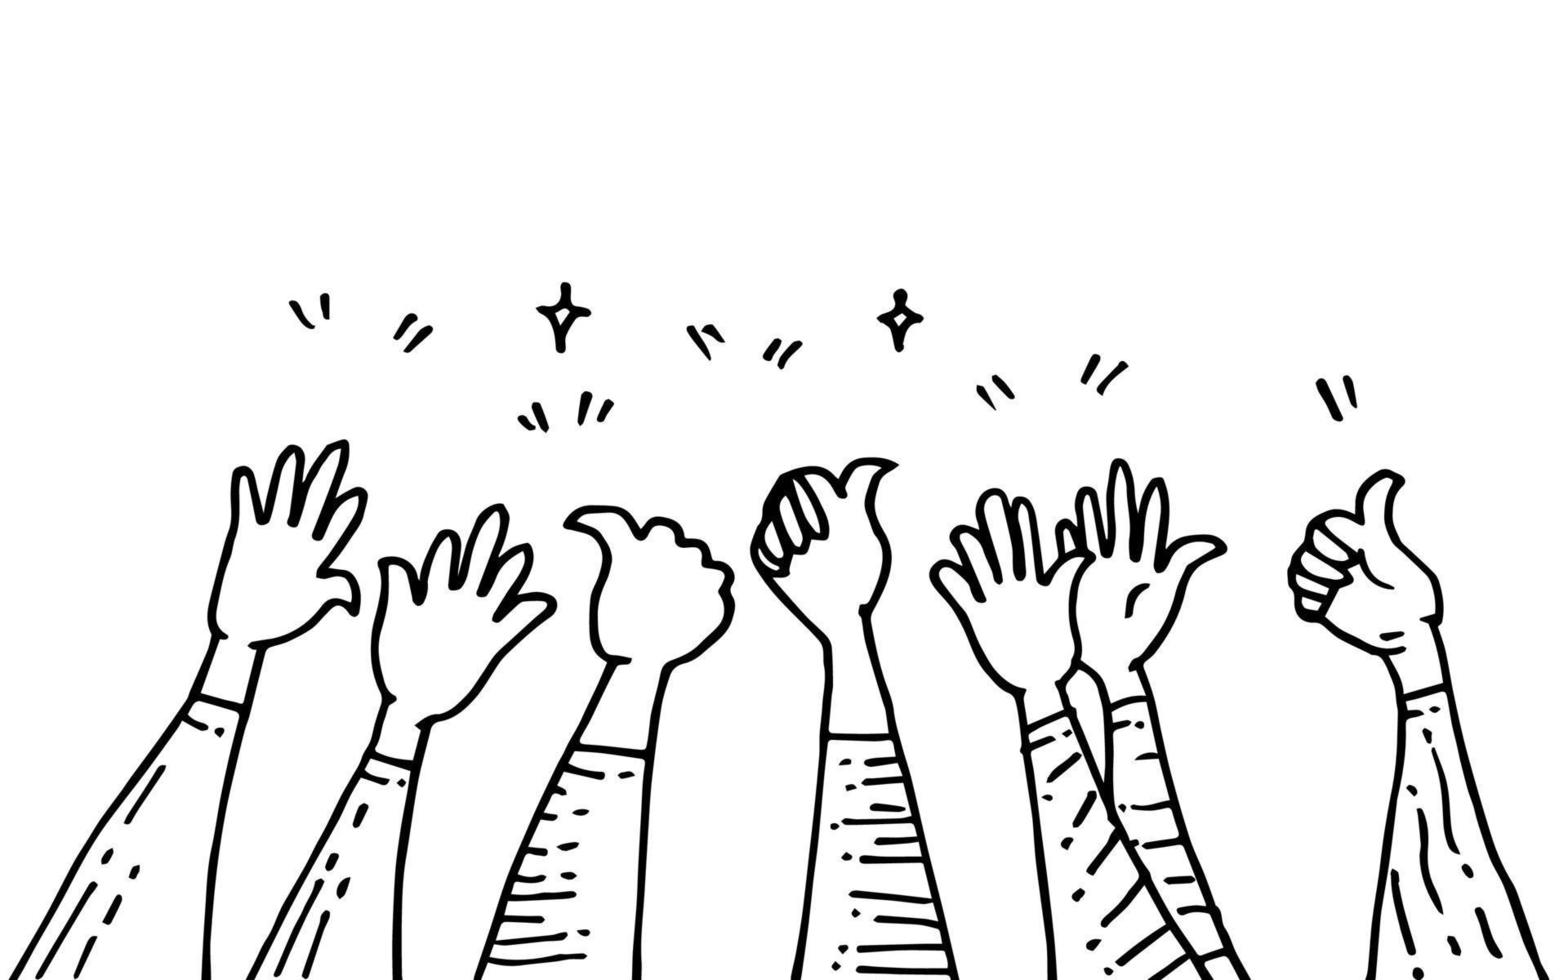 hand drawn of hands up, clapping ovation, applause, thumbs up gesture on doodle style. vector illustration